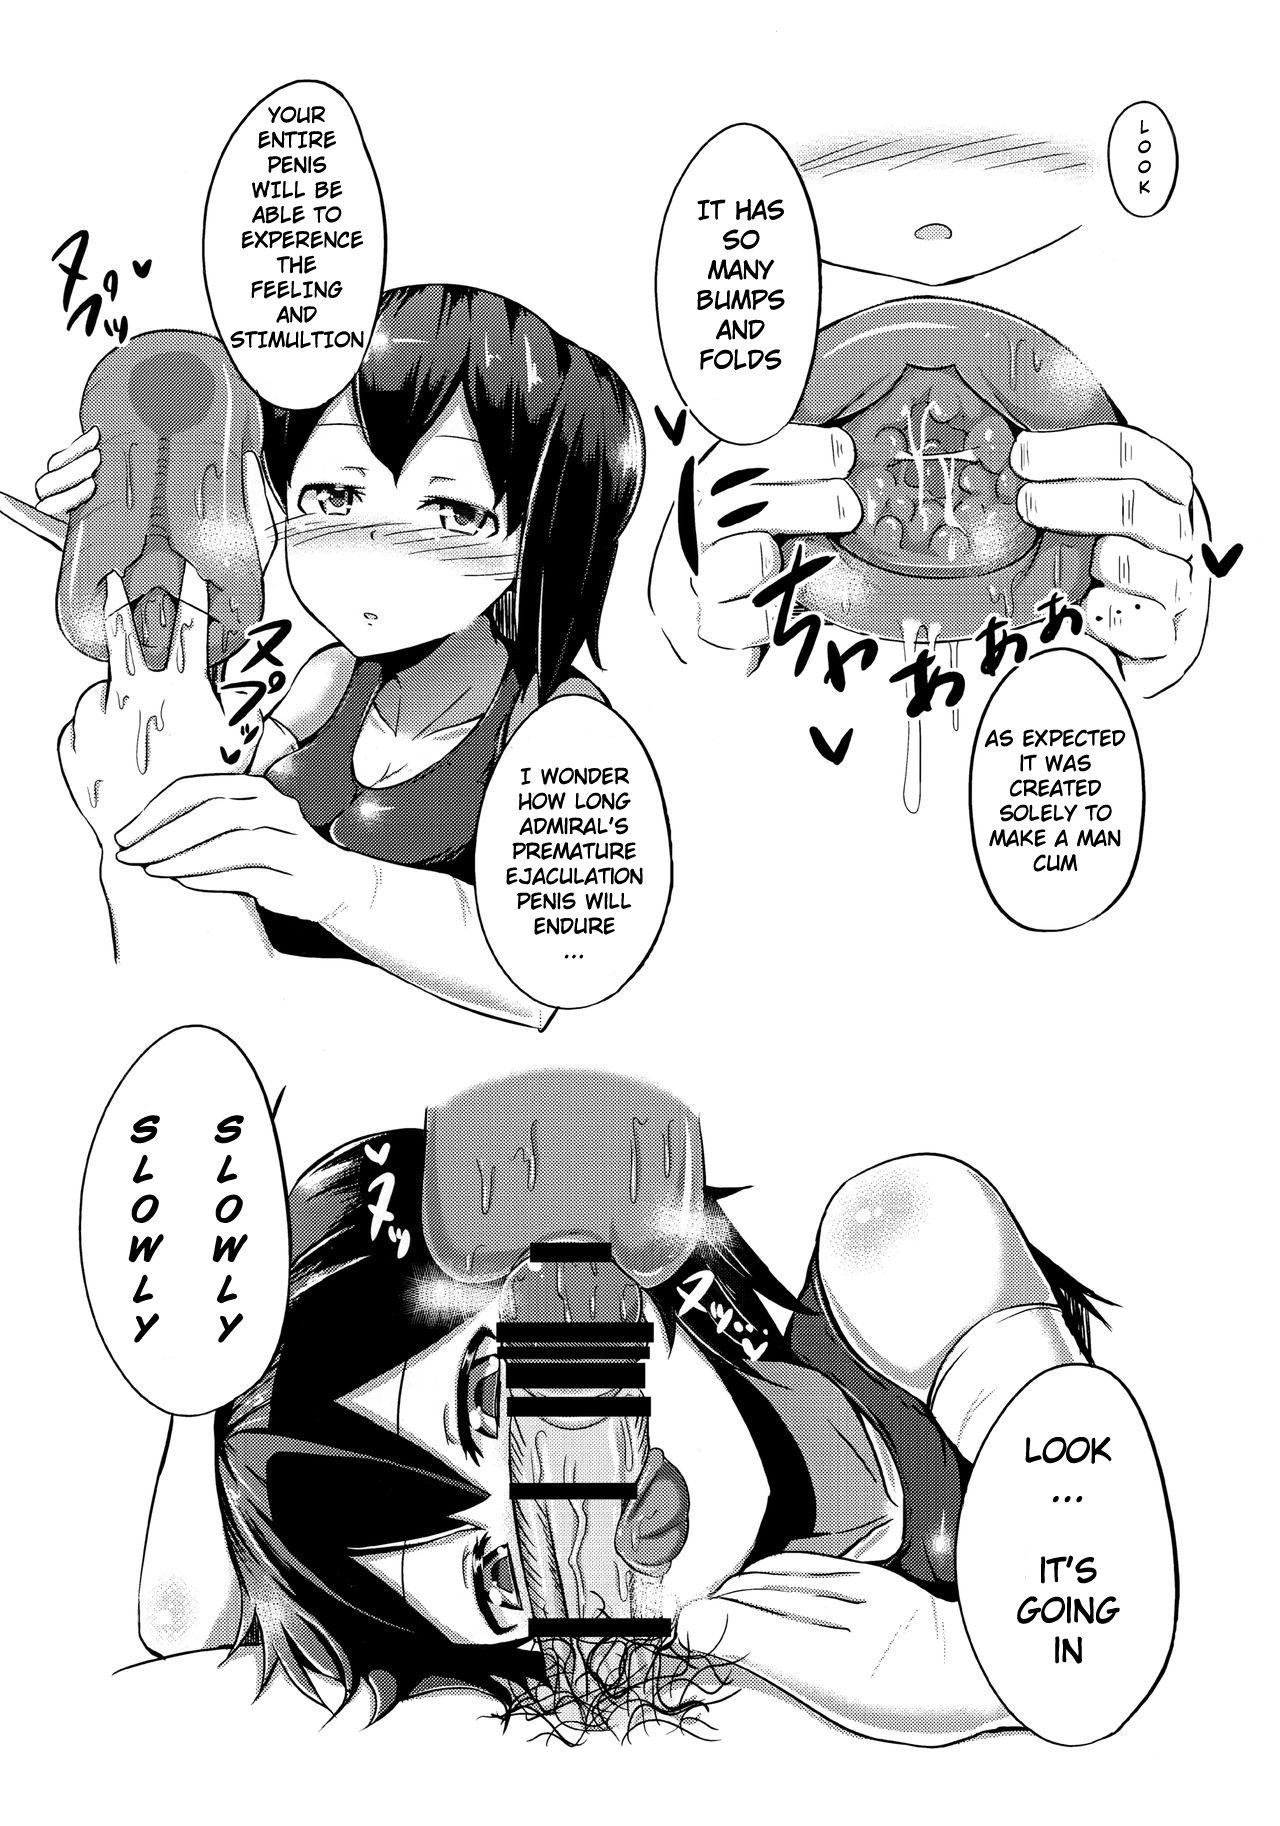 Training For The Benefit of Admiral's Premature Ejaculation with Kaga 2